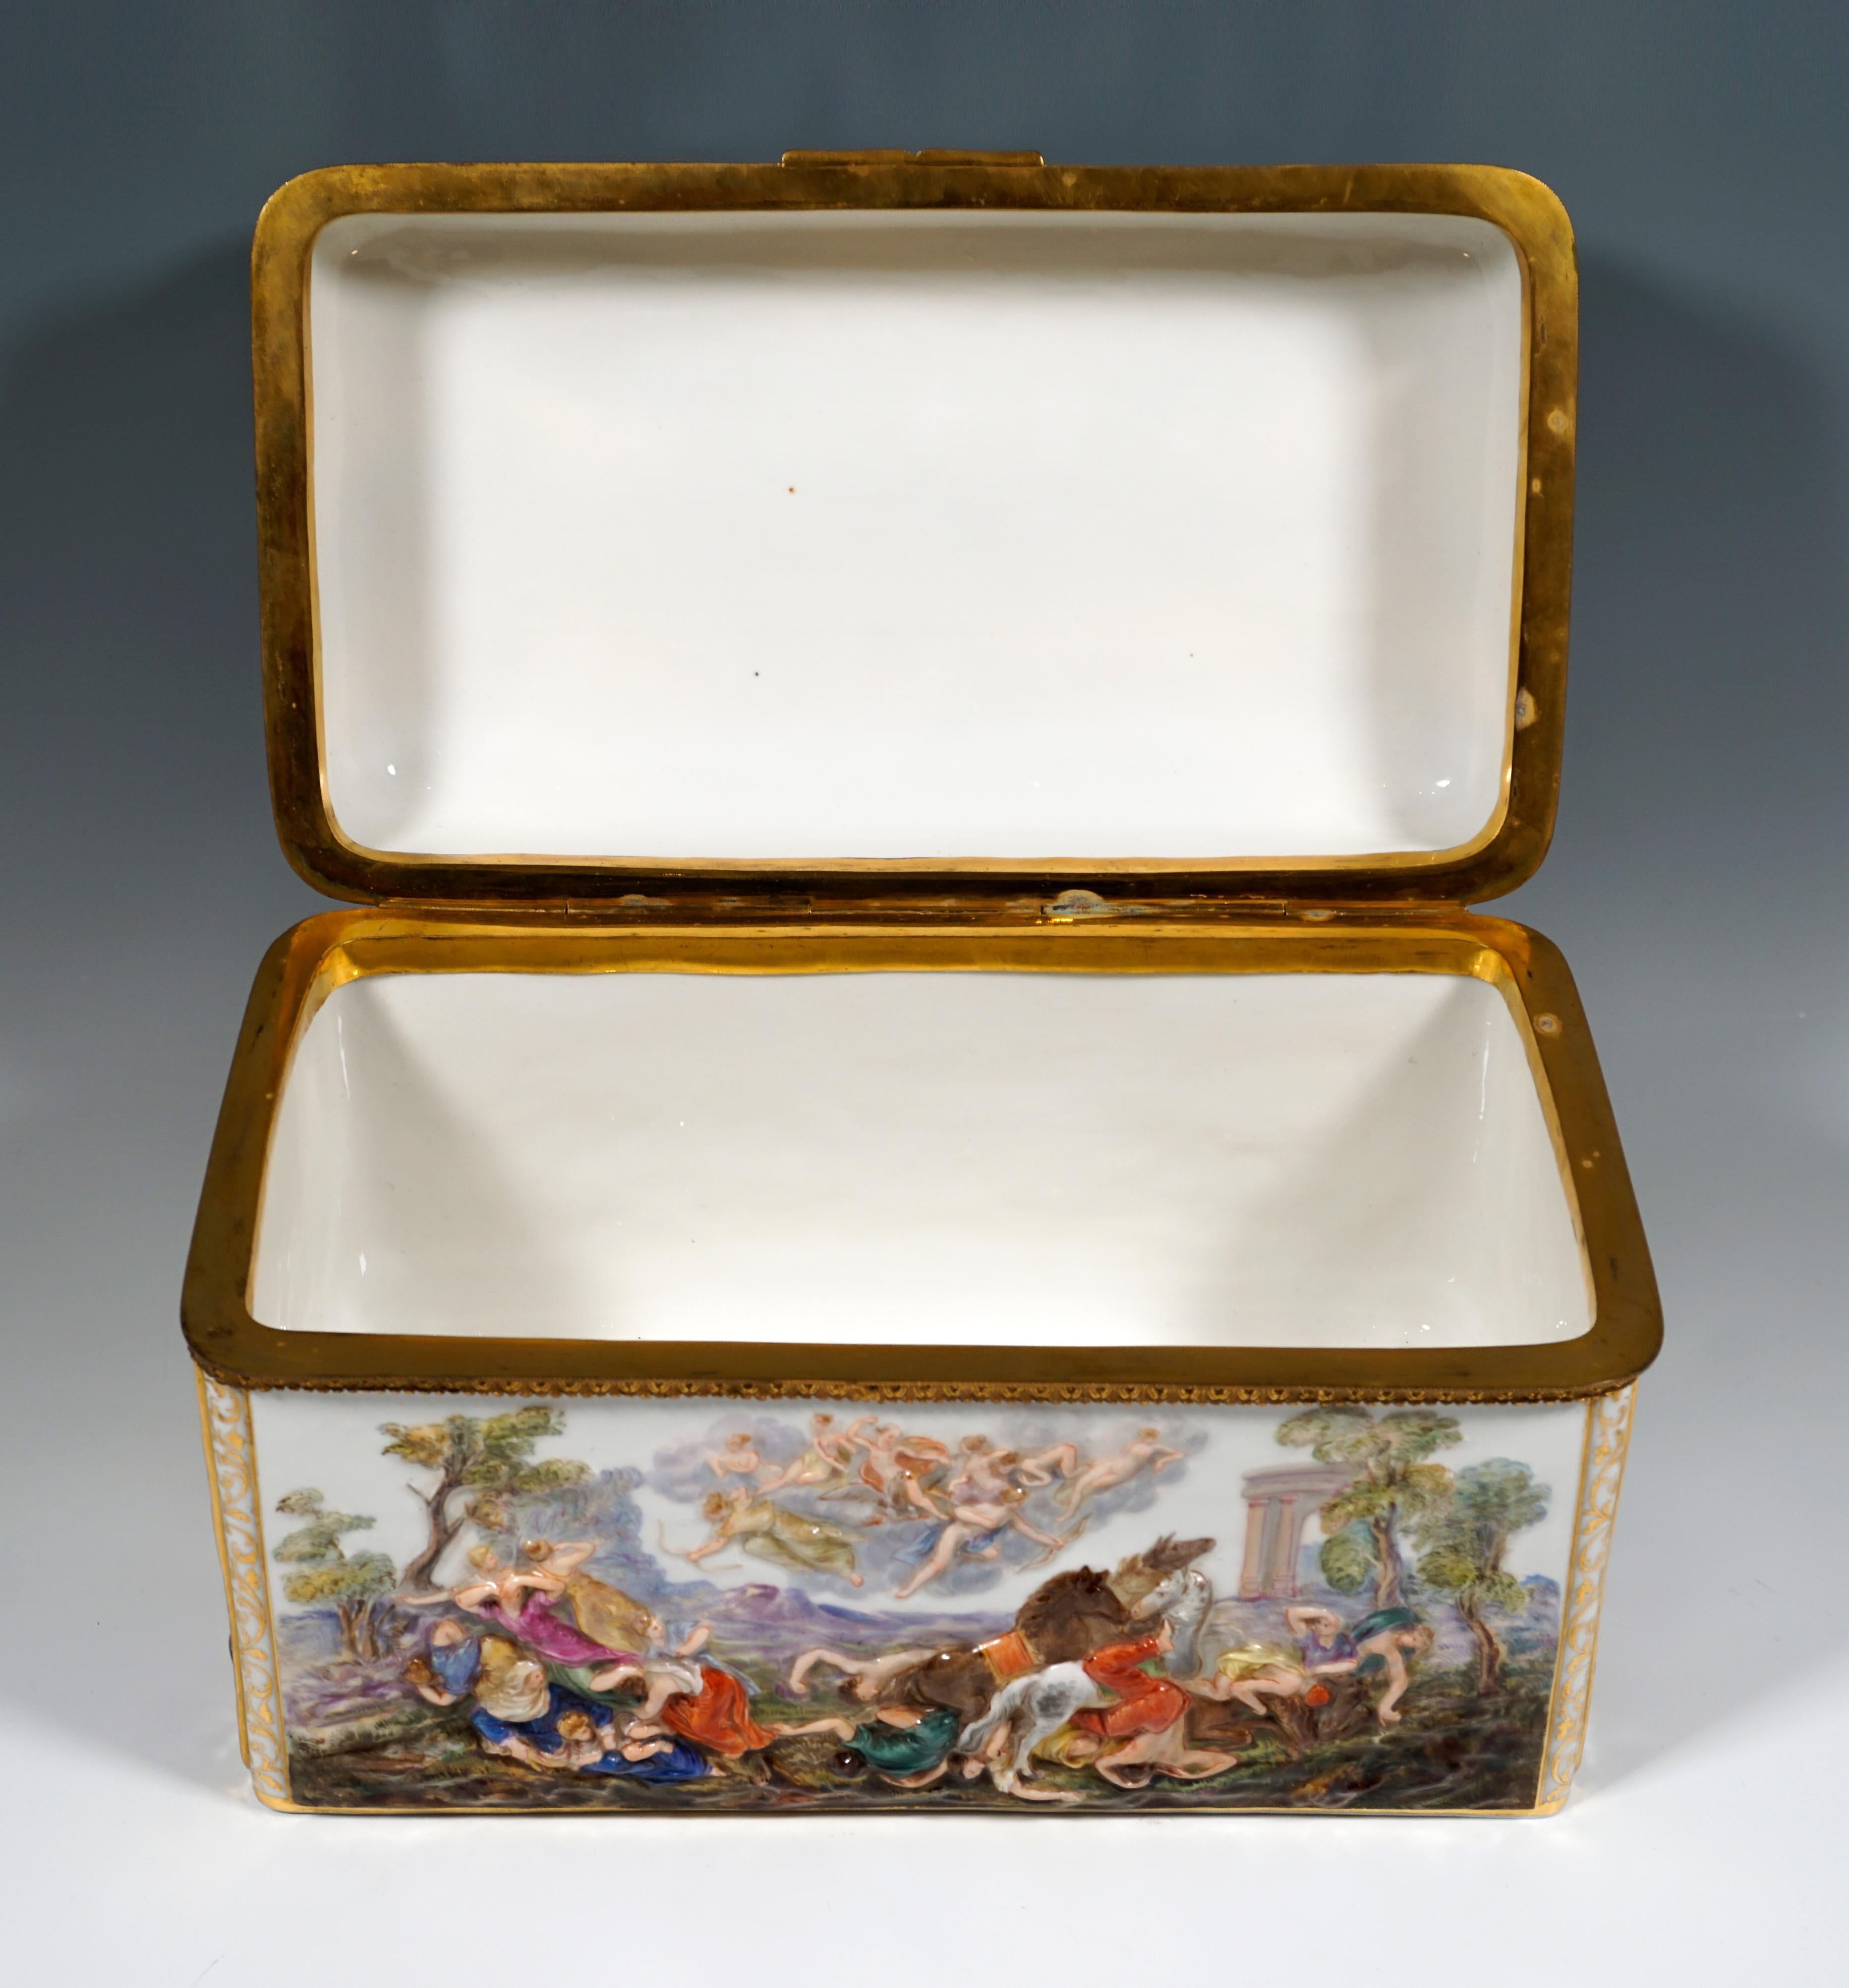 Rococo 19th Century Meissen Jewelry Box With Colored Greek Mythology Reliefs